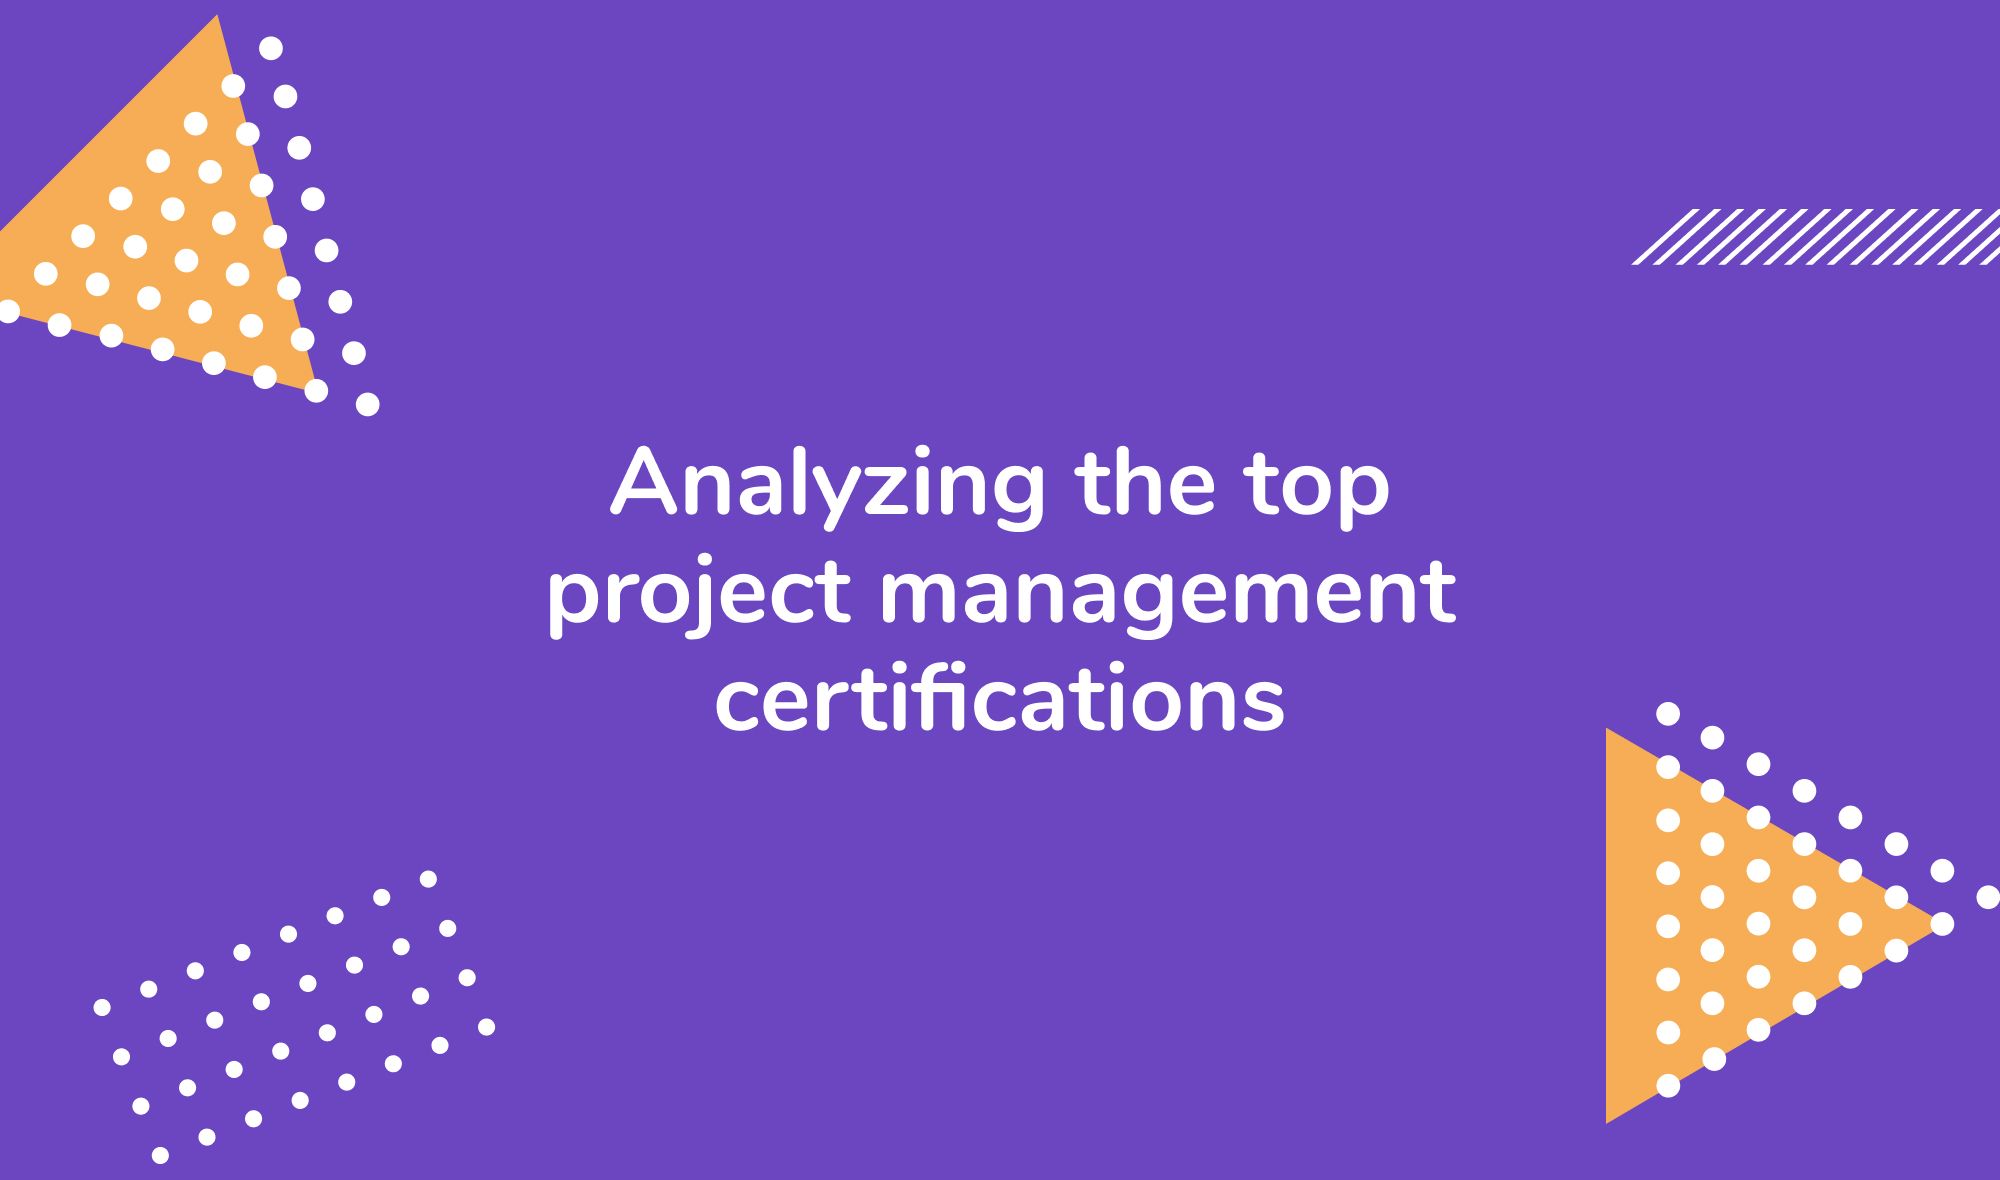 Analyzing the top project management certifications